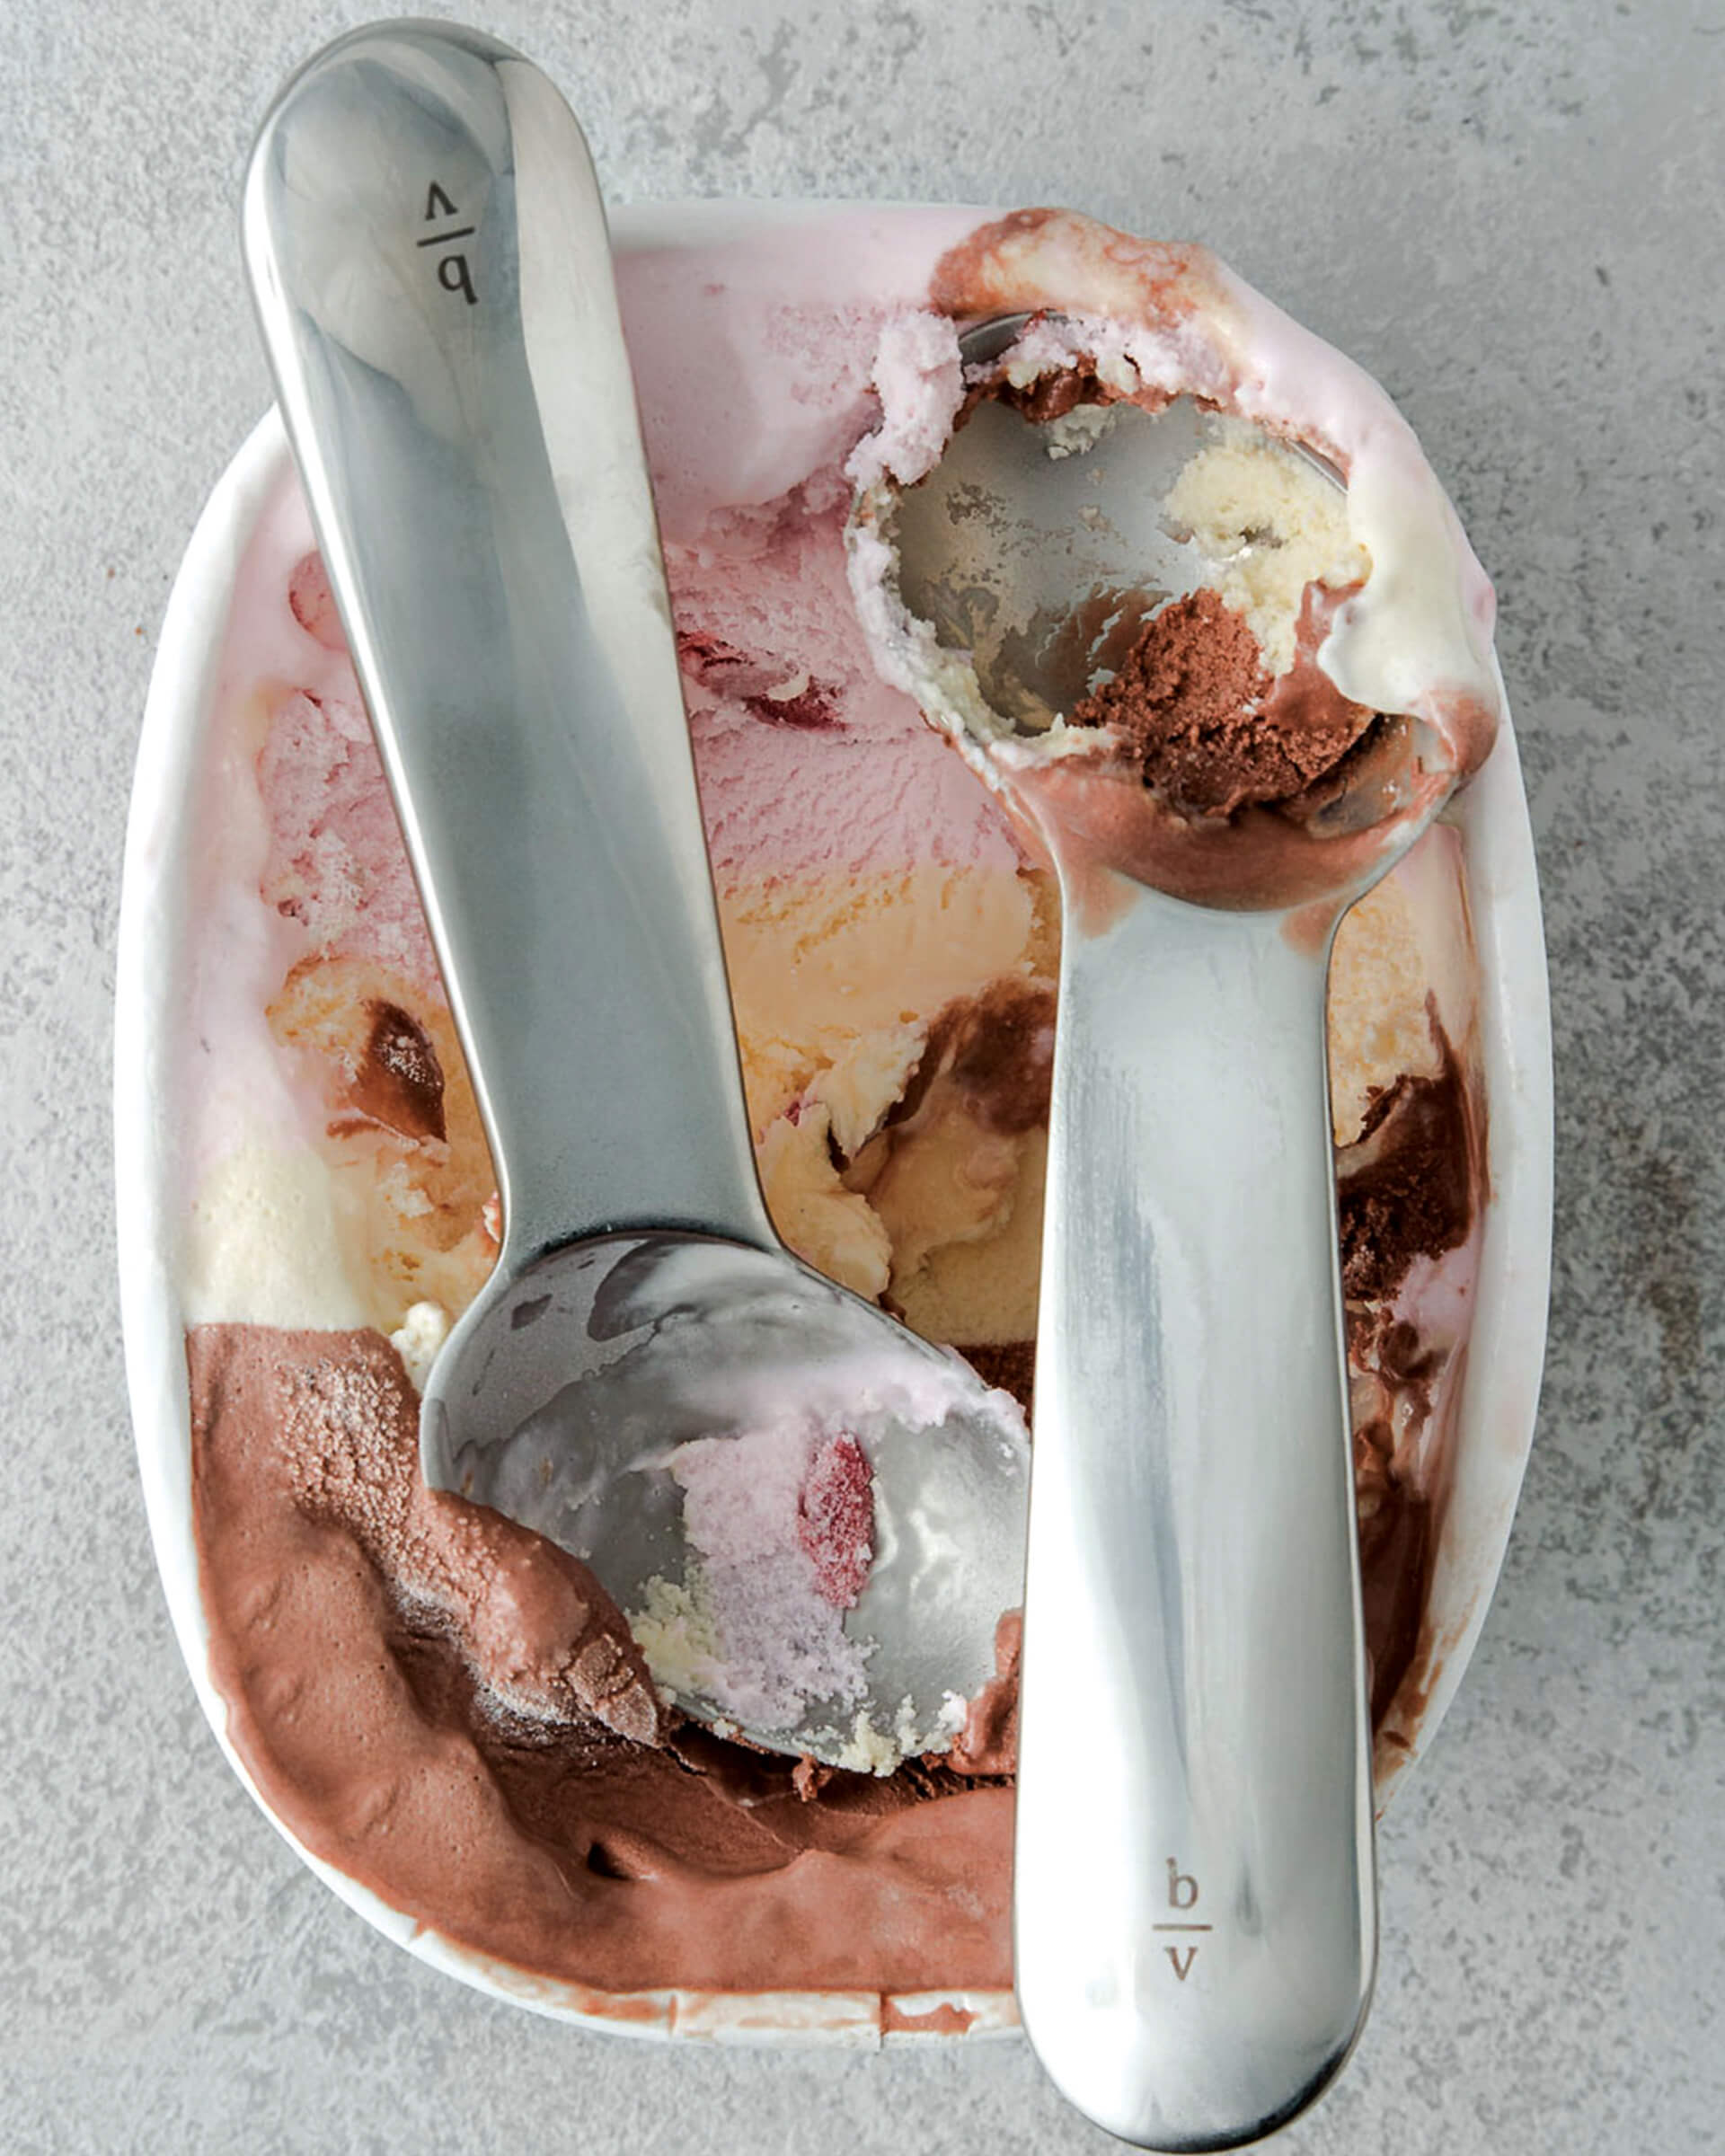 two ice cream scoops in container of ice cream